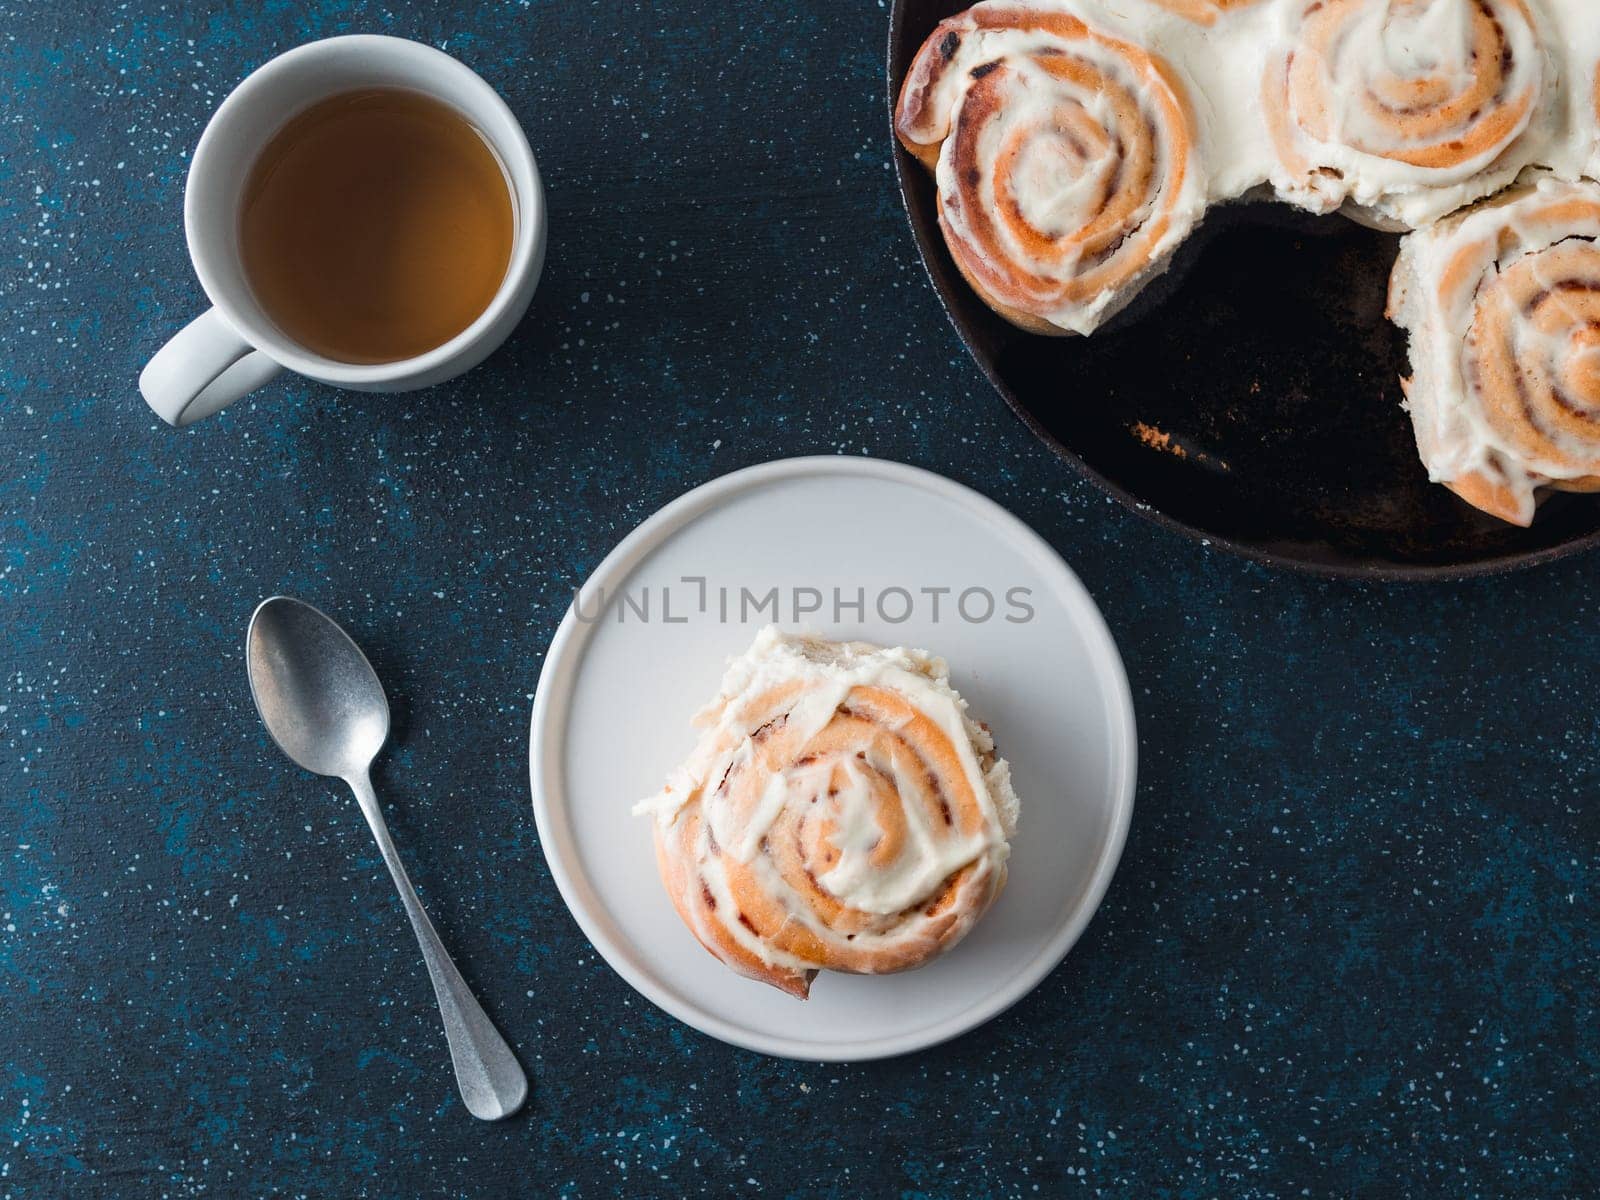 Idea and recipe pastries - perfect cinnamon rolls with topping.Vegan swedish cinnamon buns Kanelbullar with pumpkin spice,topping vegan cream cheese in plate with tea cup on table.Flat lay or top view